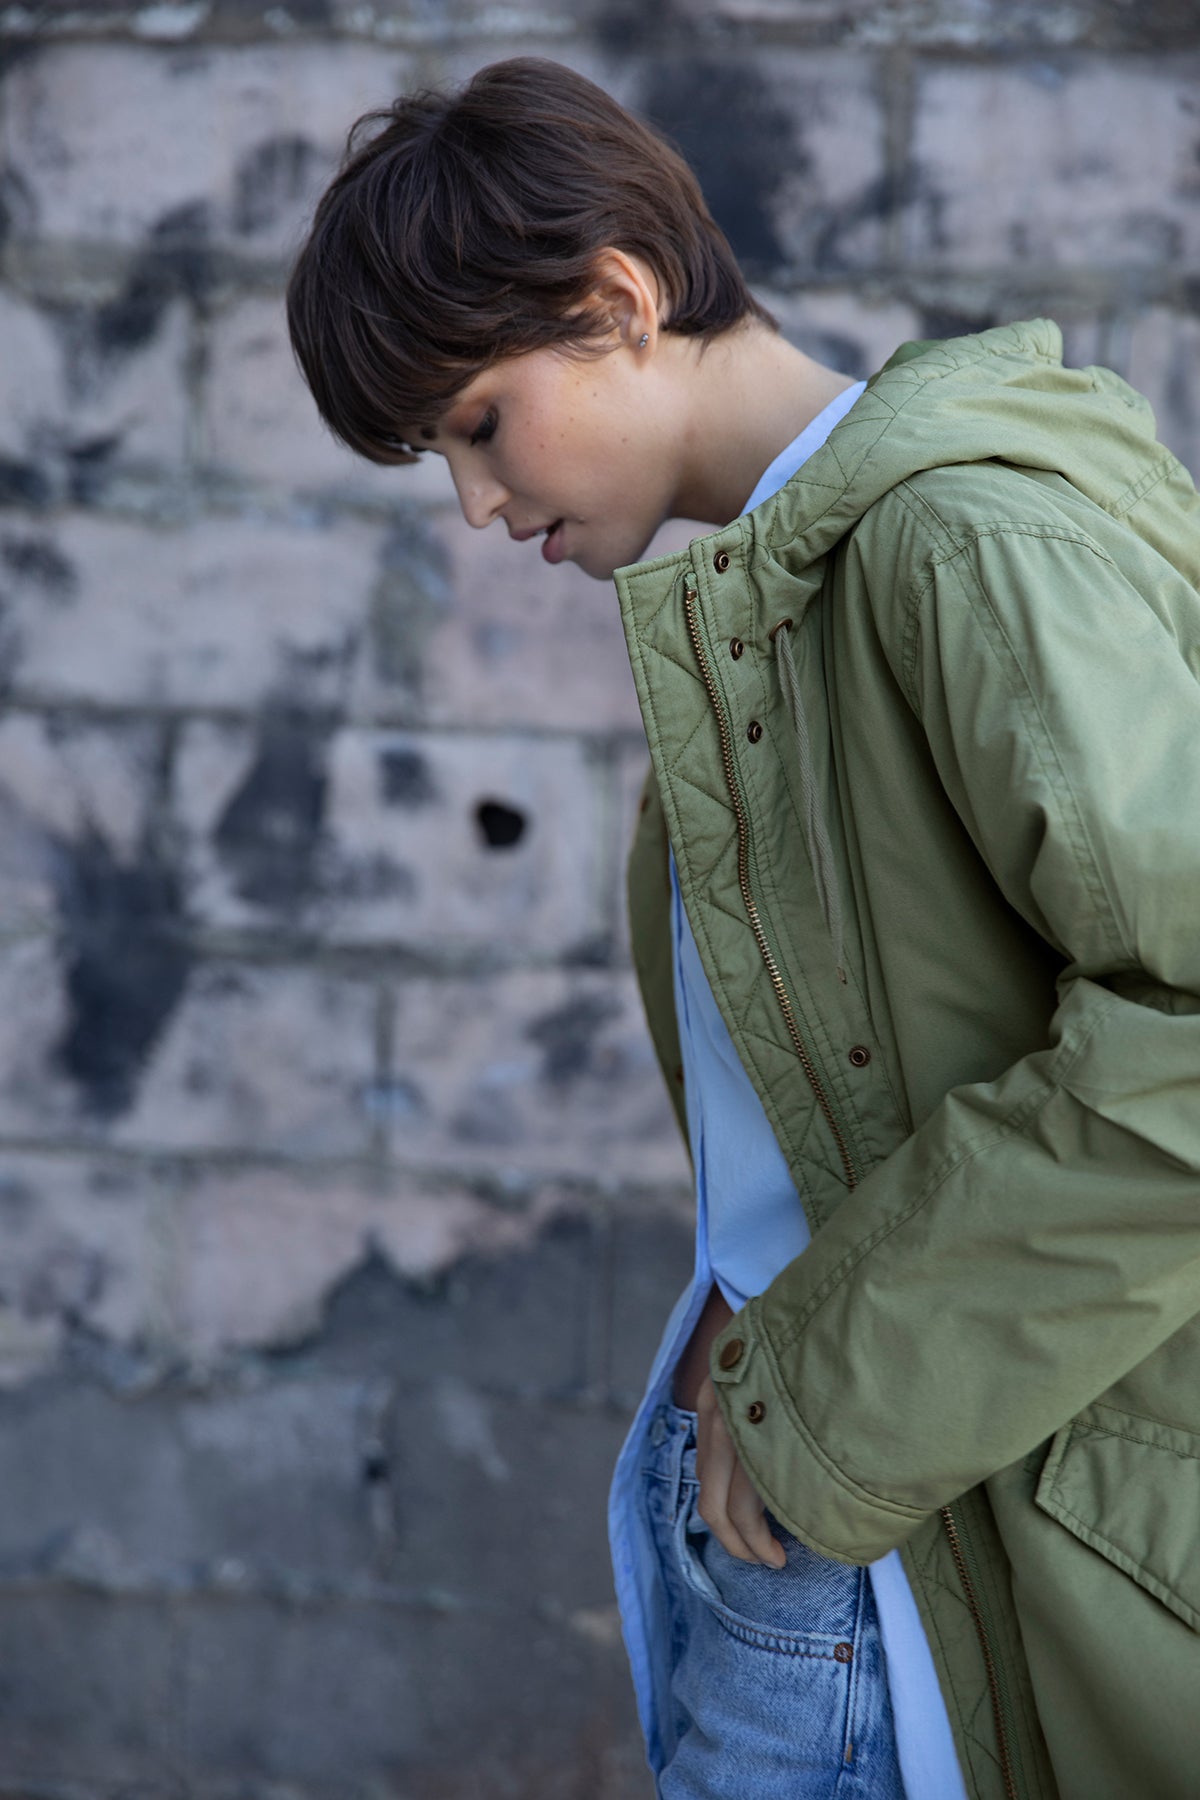   Cheviot Jacket in evergreen layered over Redondo shirt in mist blue side 